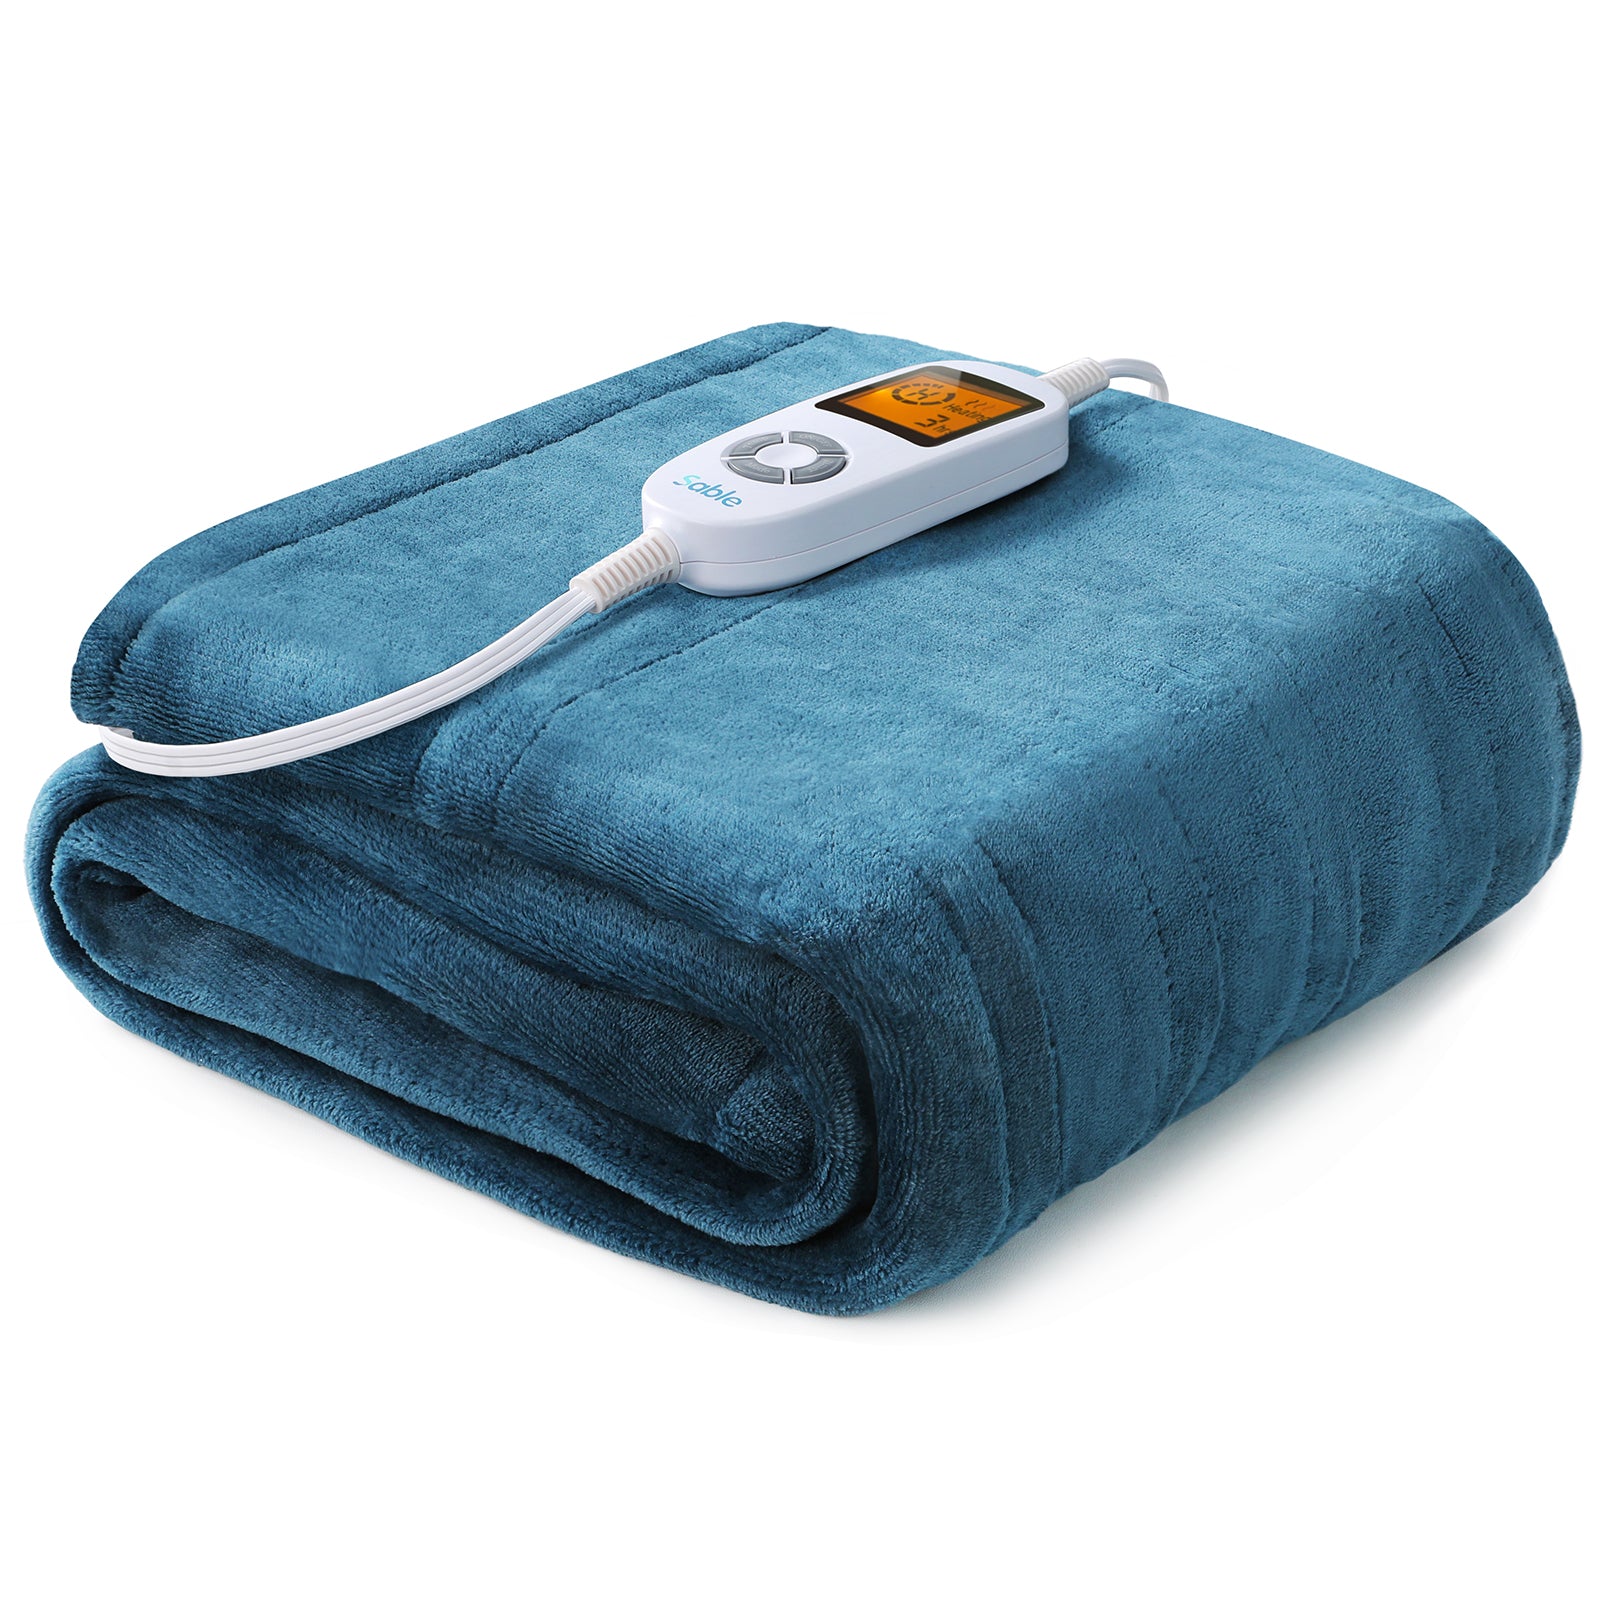 【50'' x 60''】Electric Heated Blanket, Throw 50'' x 60'' Full Size